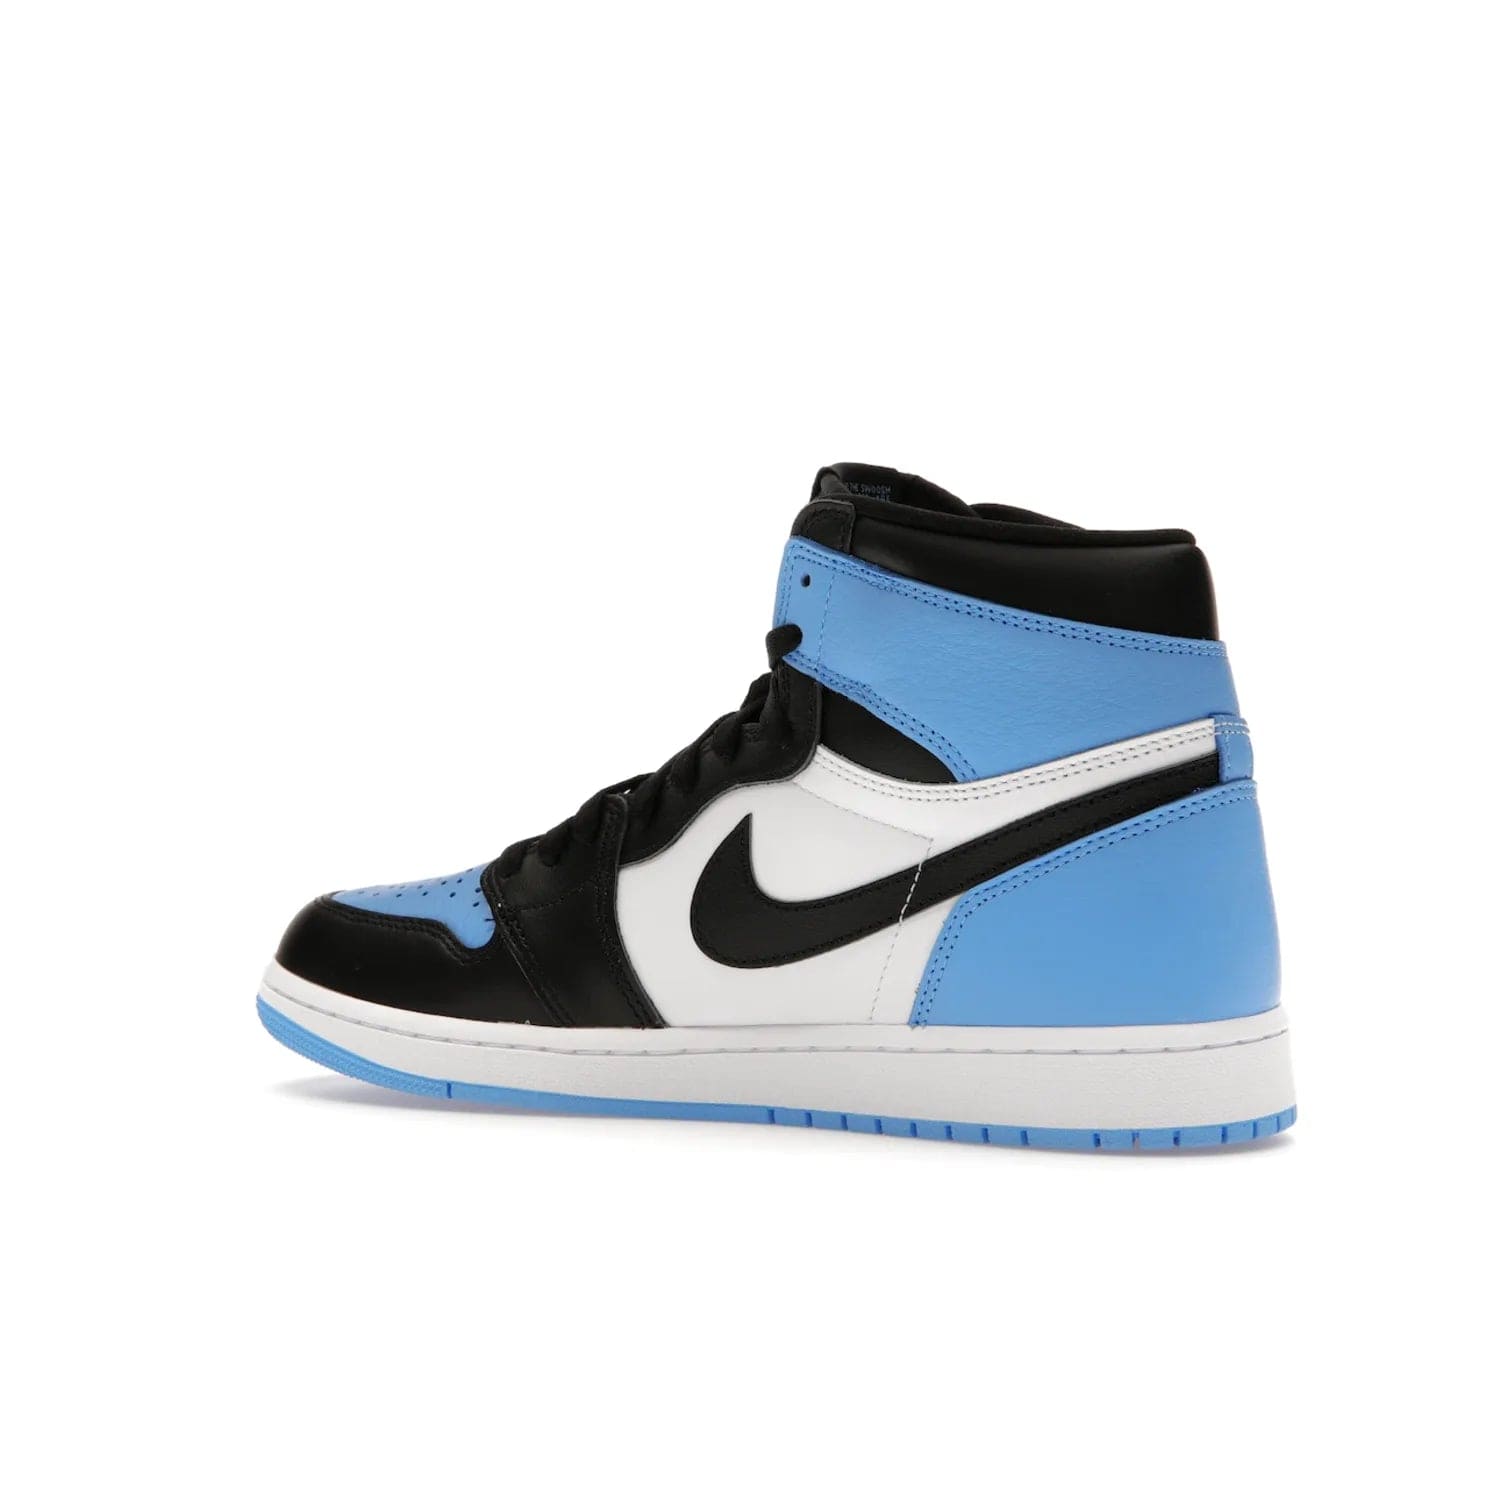 Jordan 1 Retro High OG UNC Toe - Image 22 - Only at www.BallersClubKickz.com - Jordan 1 High OG UNC Toe is a fashionable, high-quality sneaker featuring University Blue, Black White and White. Releasing July 22, 2023, it's the perfect pick up for sneakerheads.